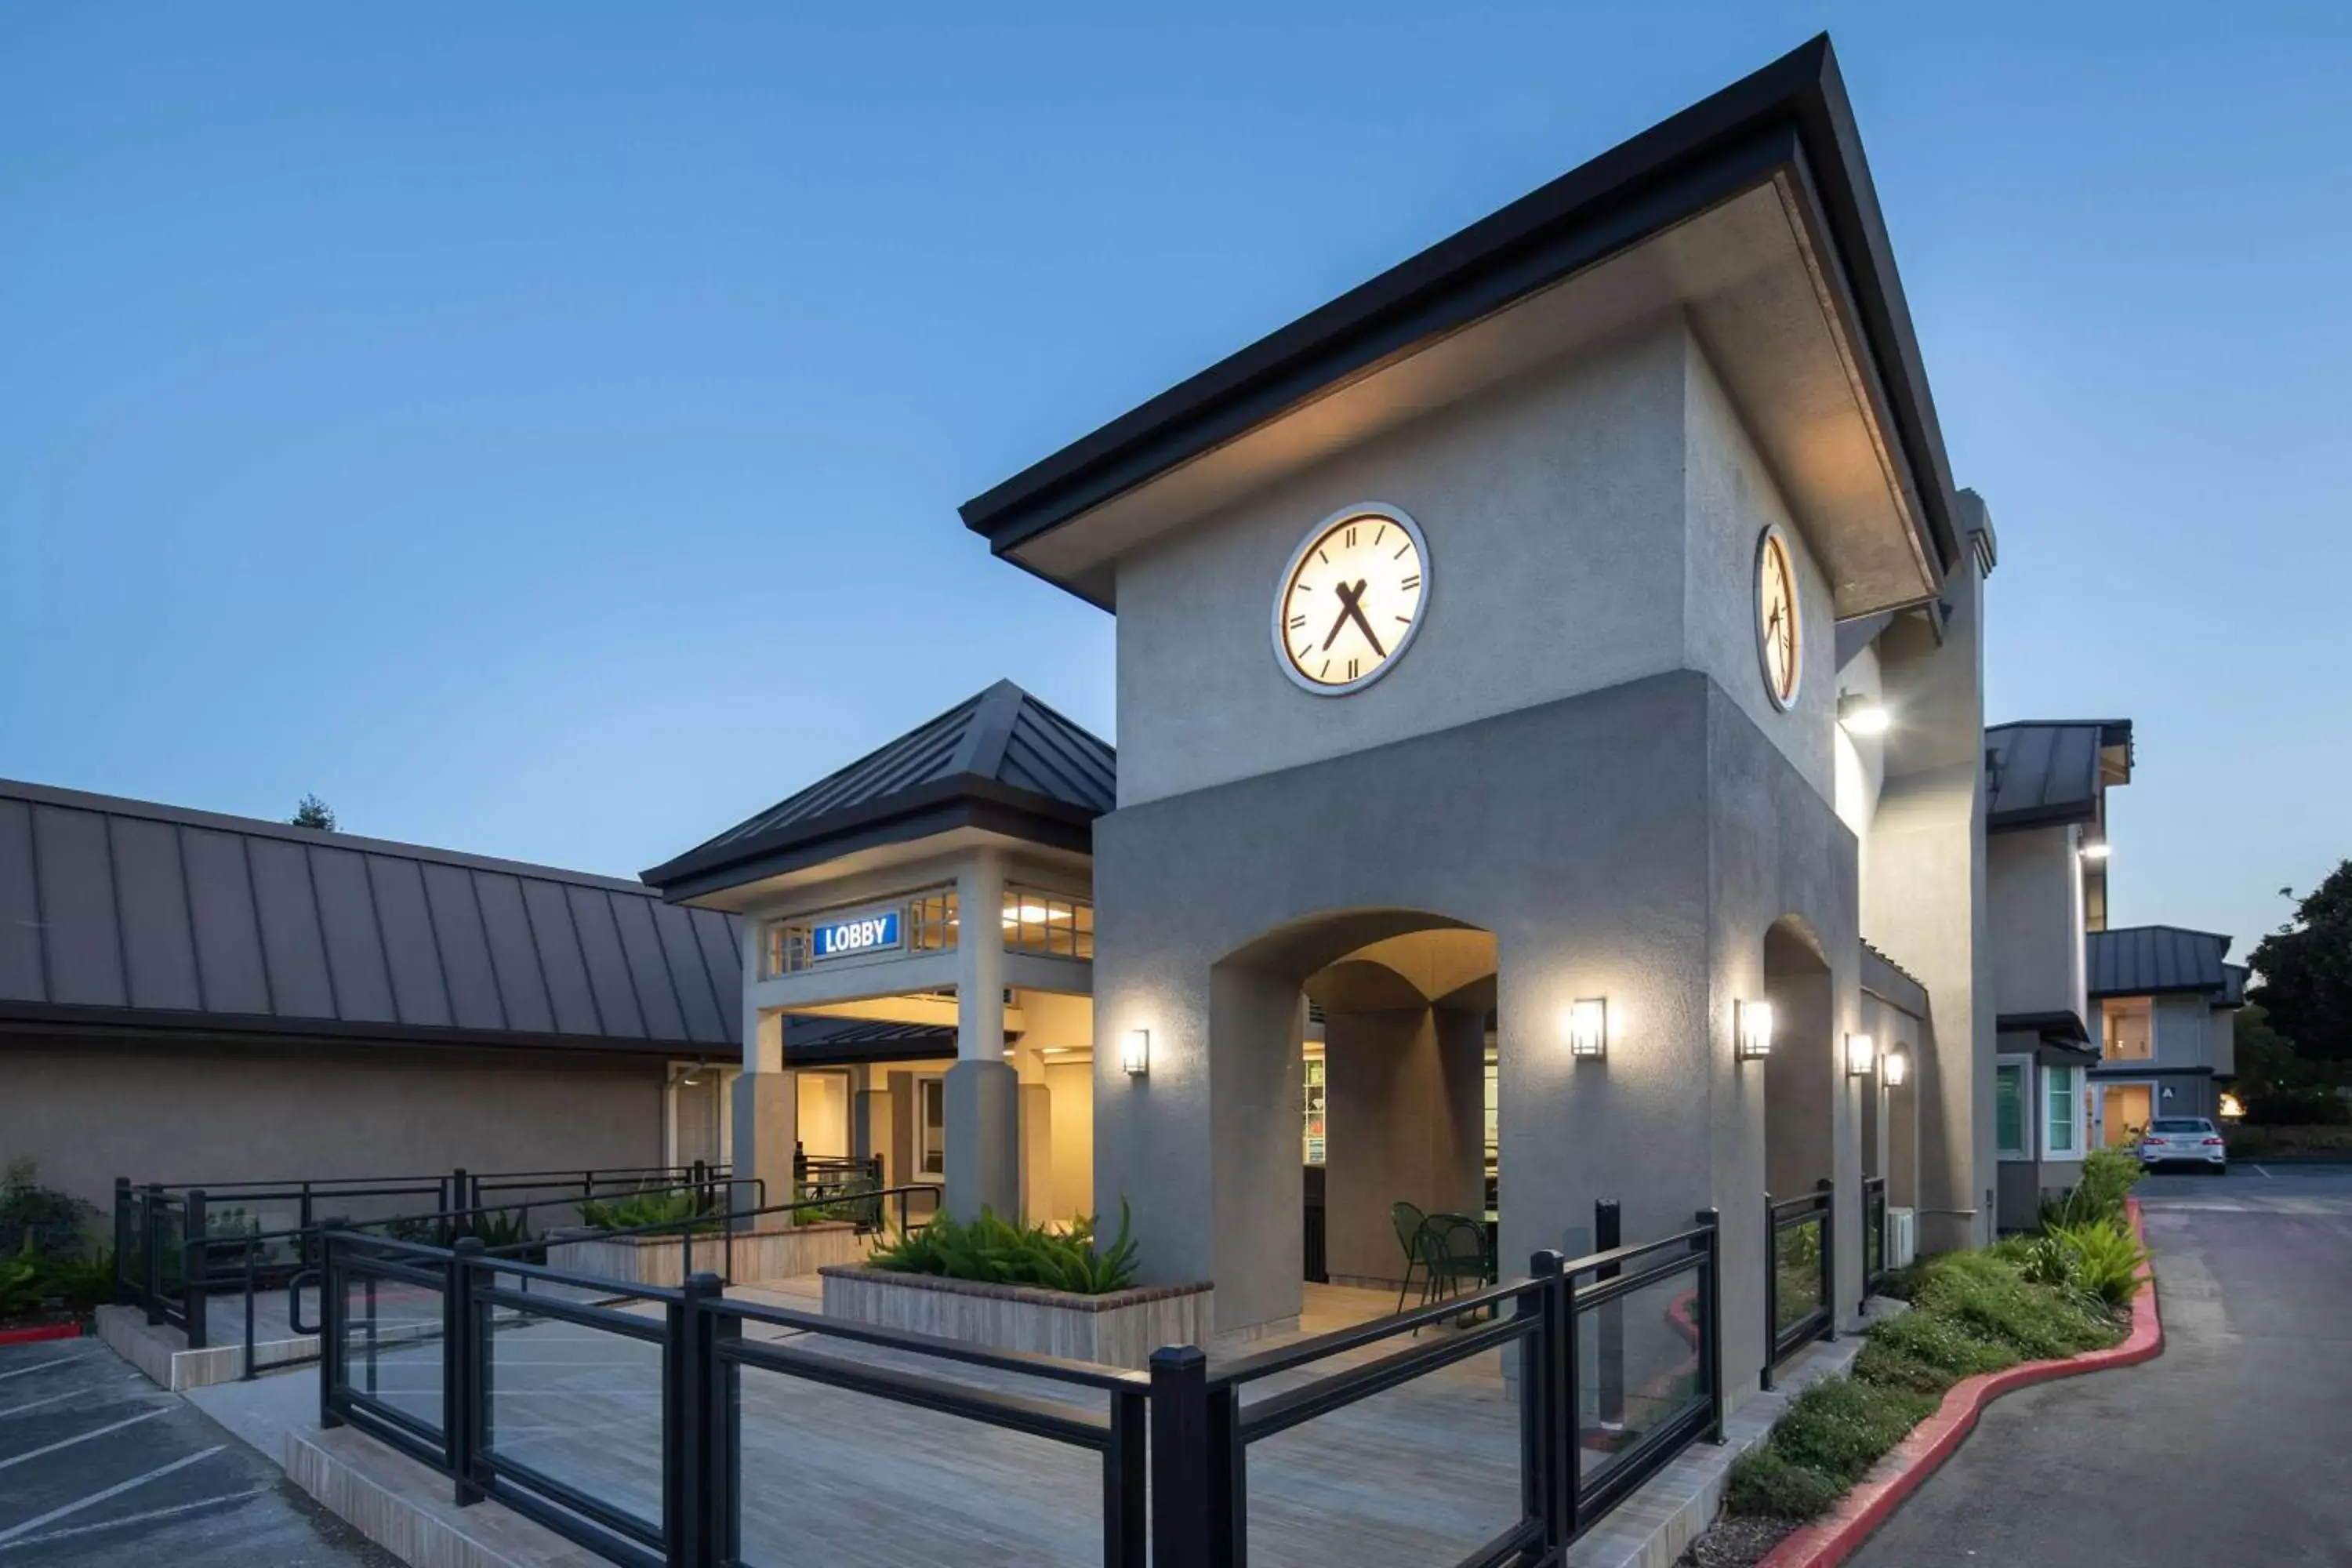 Property Building in Best Western Silicon Valley Inn